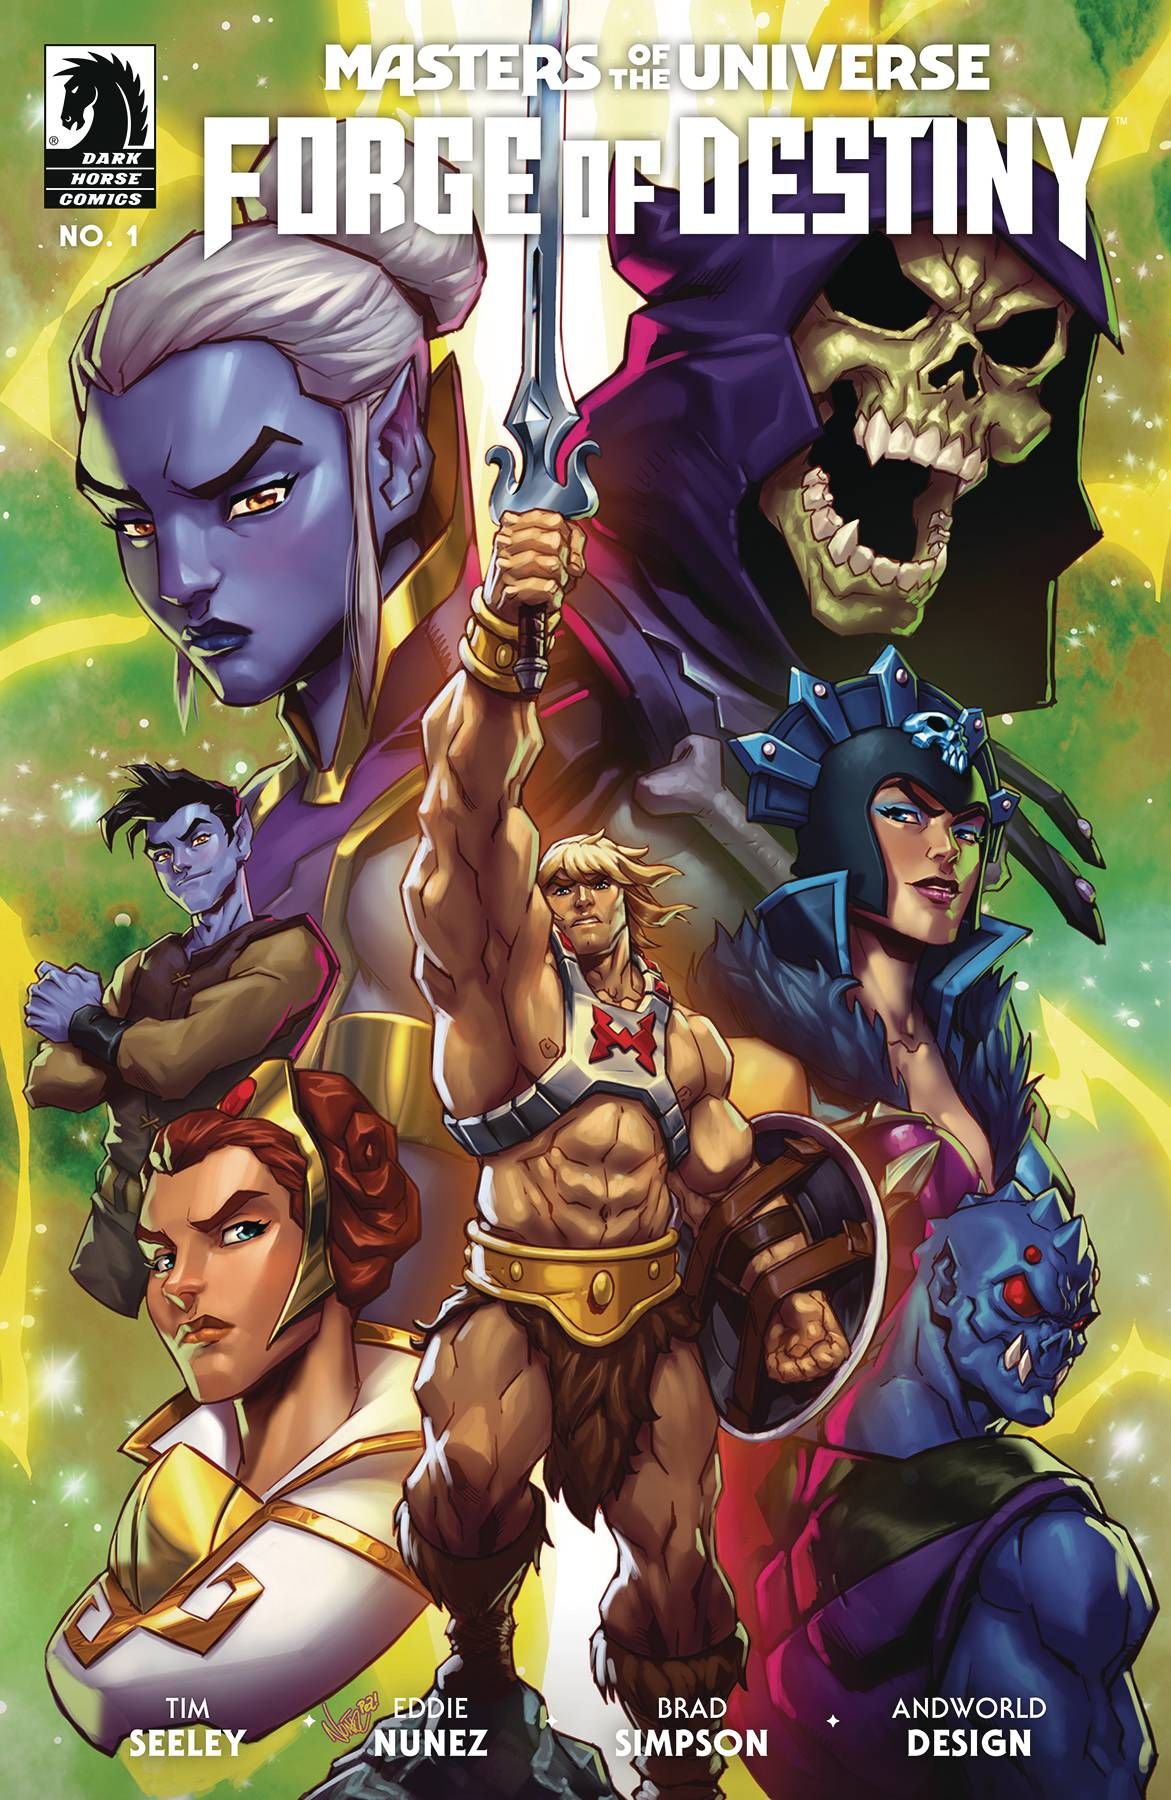 he-man-masters-of-the-universe-forge-of-destiny-cover.jpg